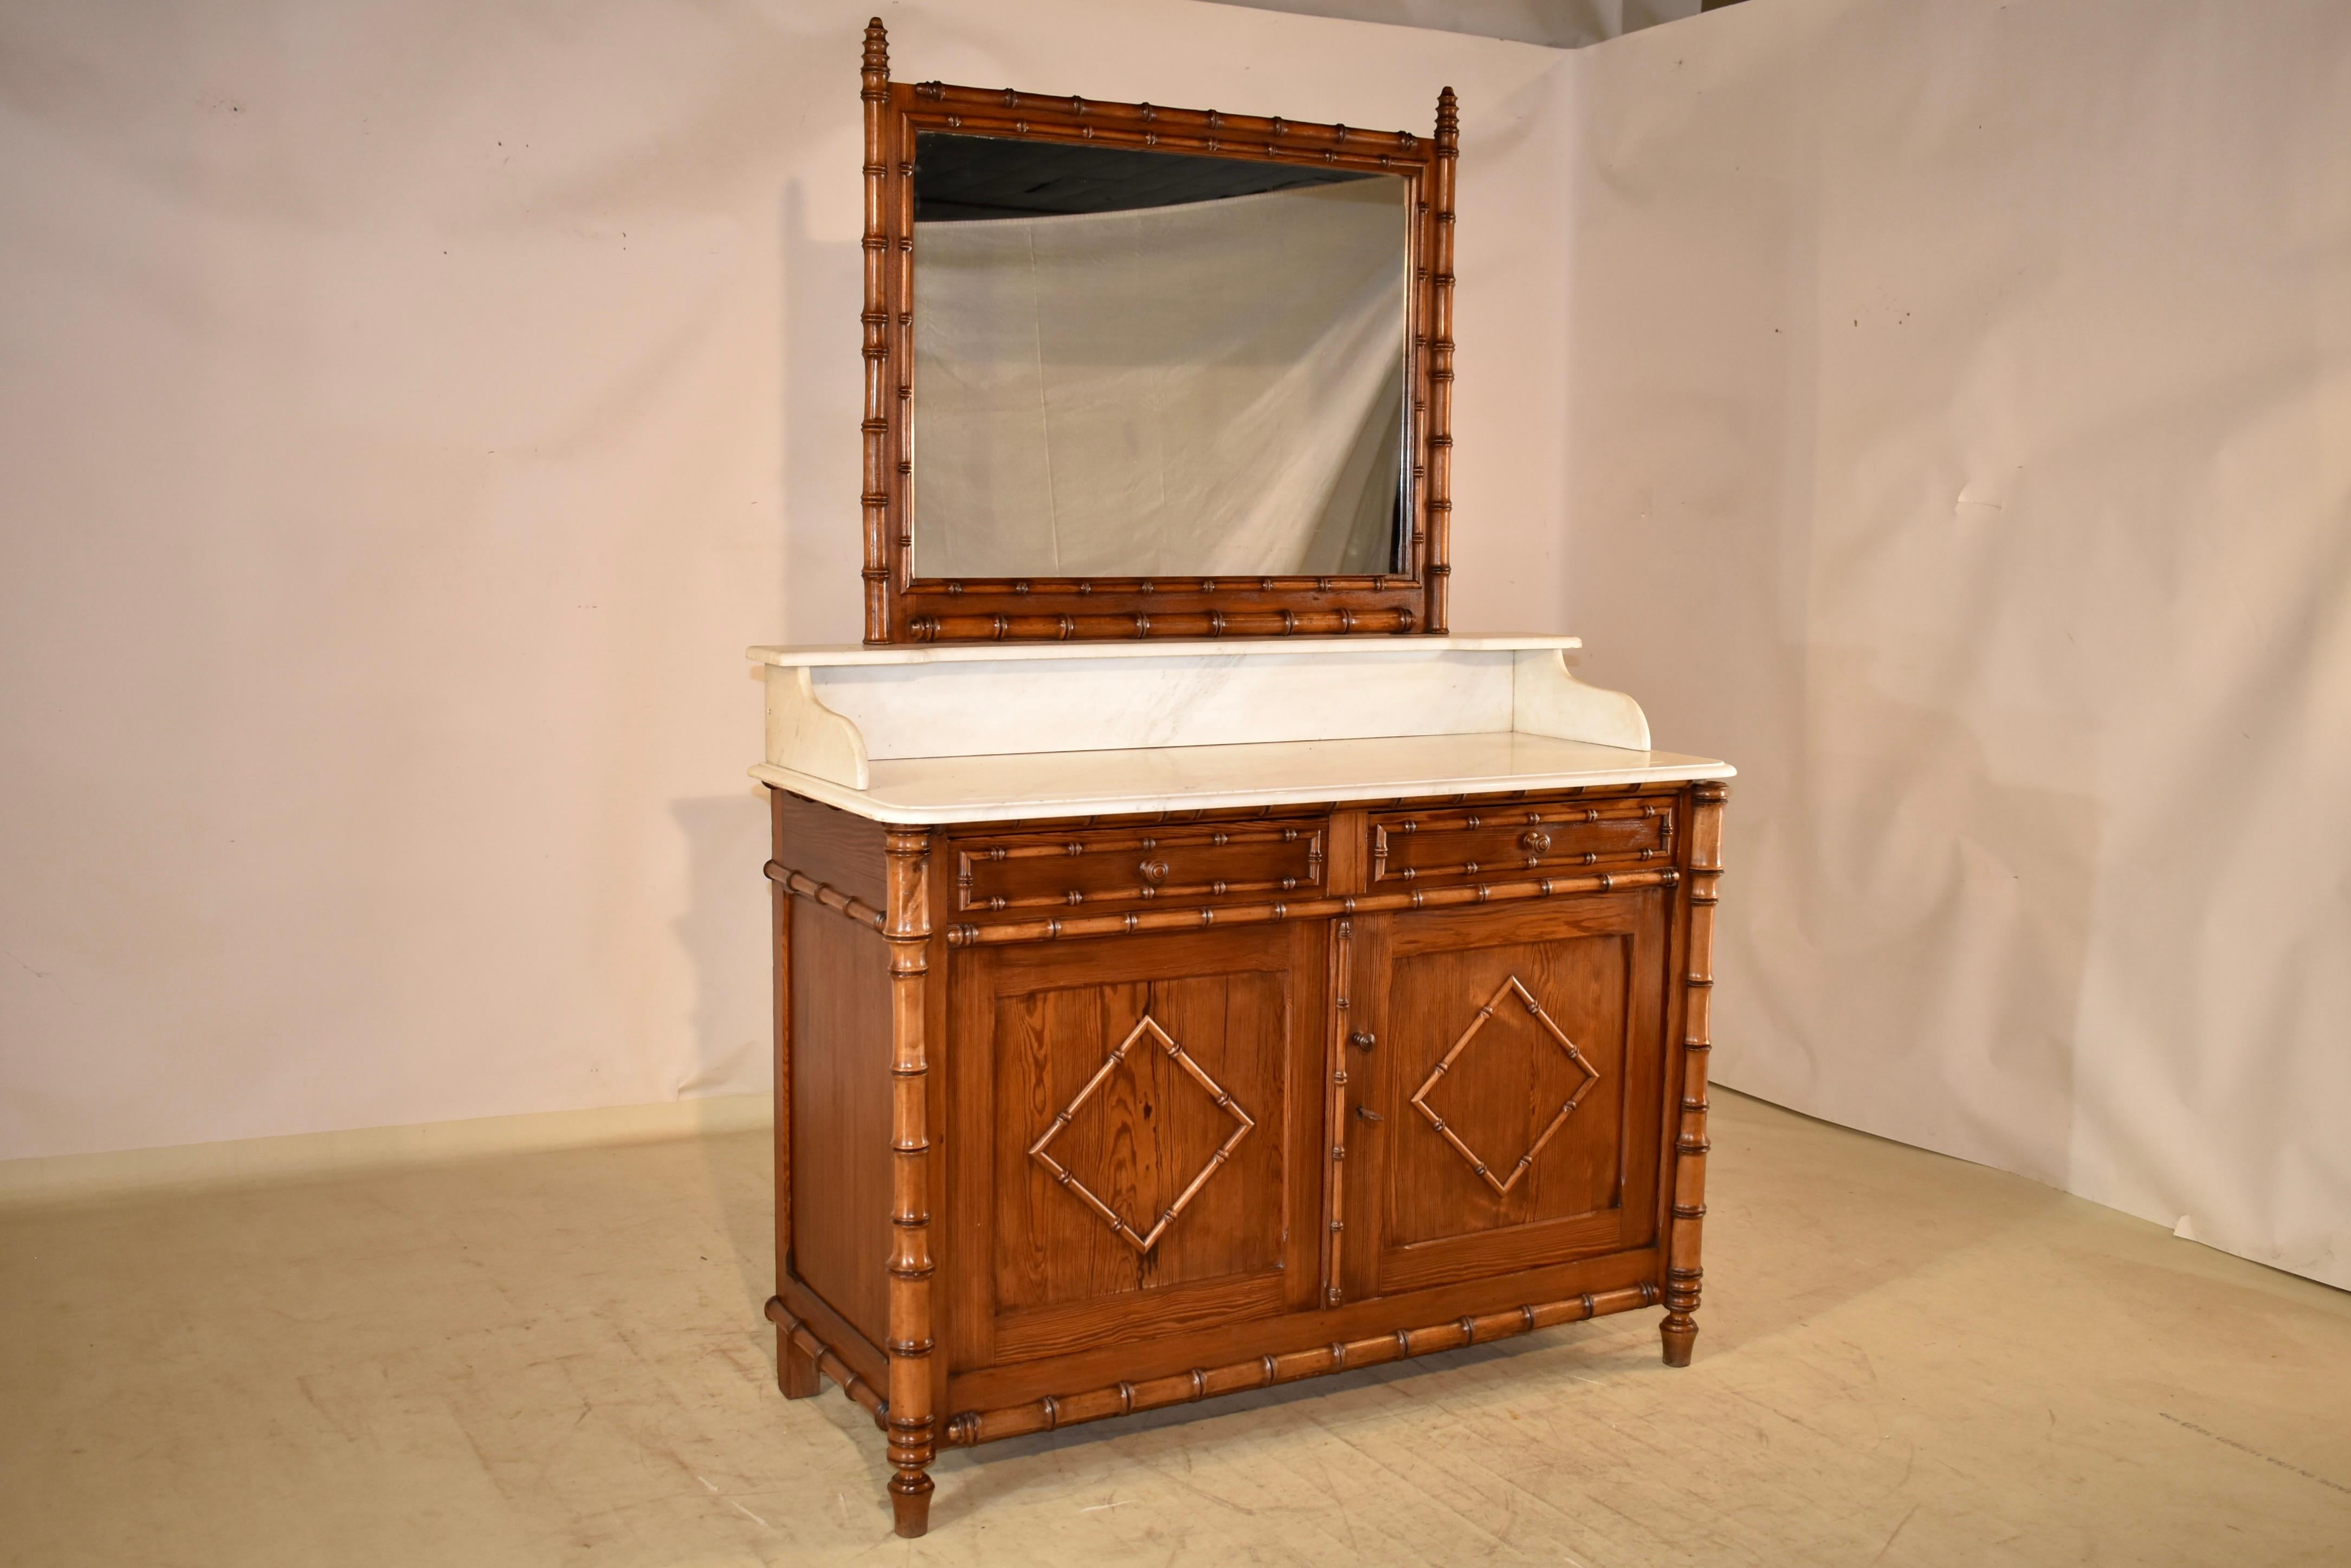 19th century faux bamboo wash stand from France with the original attached mirror, framed by gorgeous faux bamboo molded framing, sitting atop a marble shelf, which is supported on marble brackets on a Carrara marble top.  The counter height is